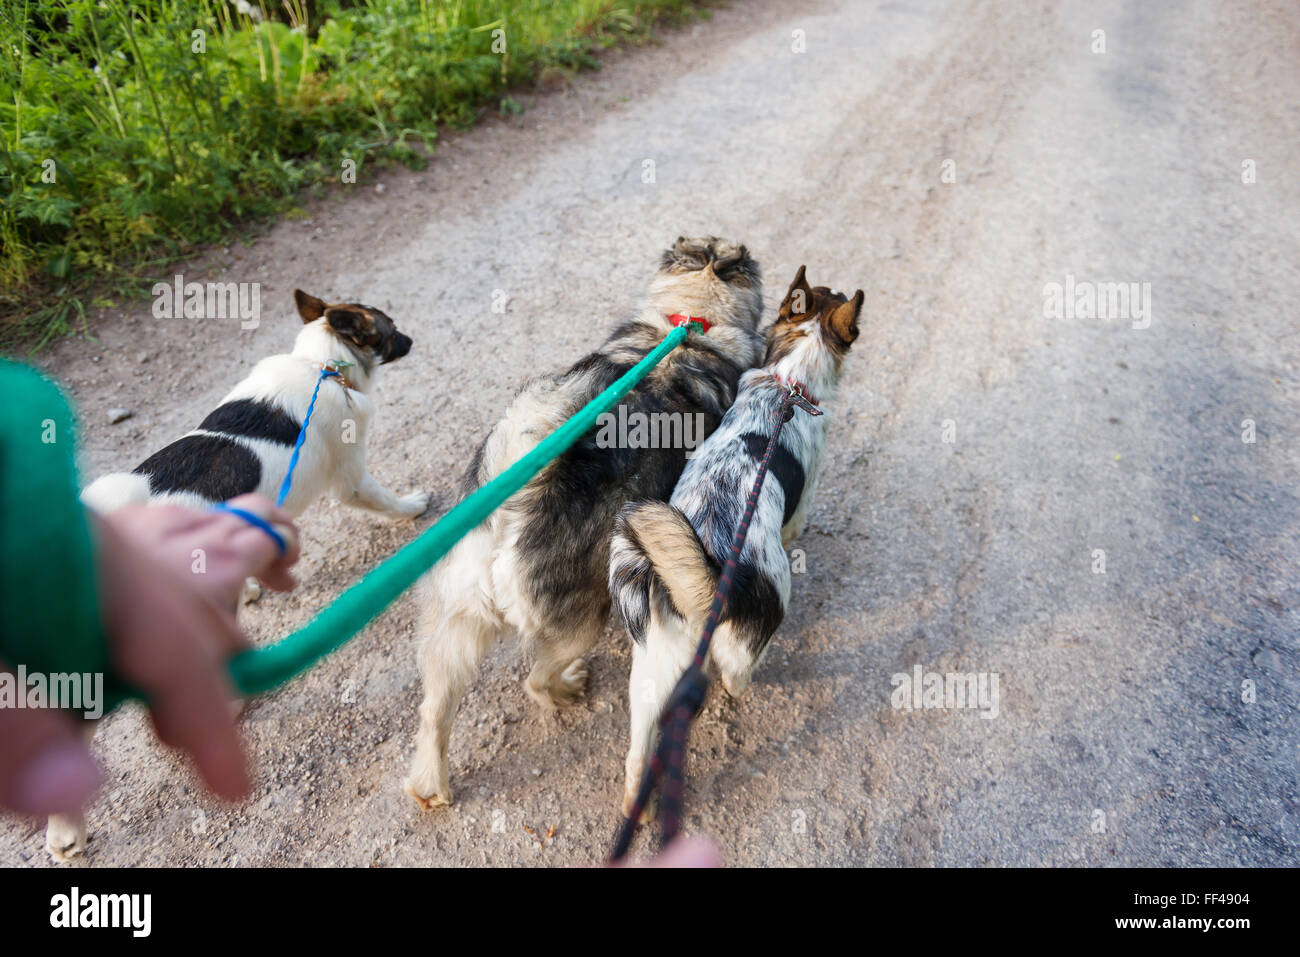 Unrecognizable man walking three dogs on a dry dusty road Stock Photo